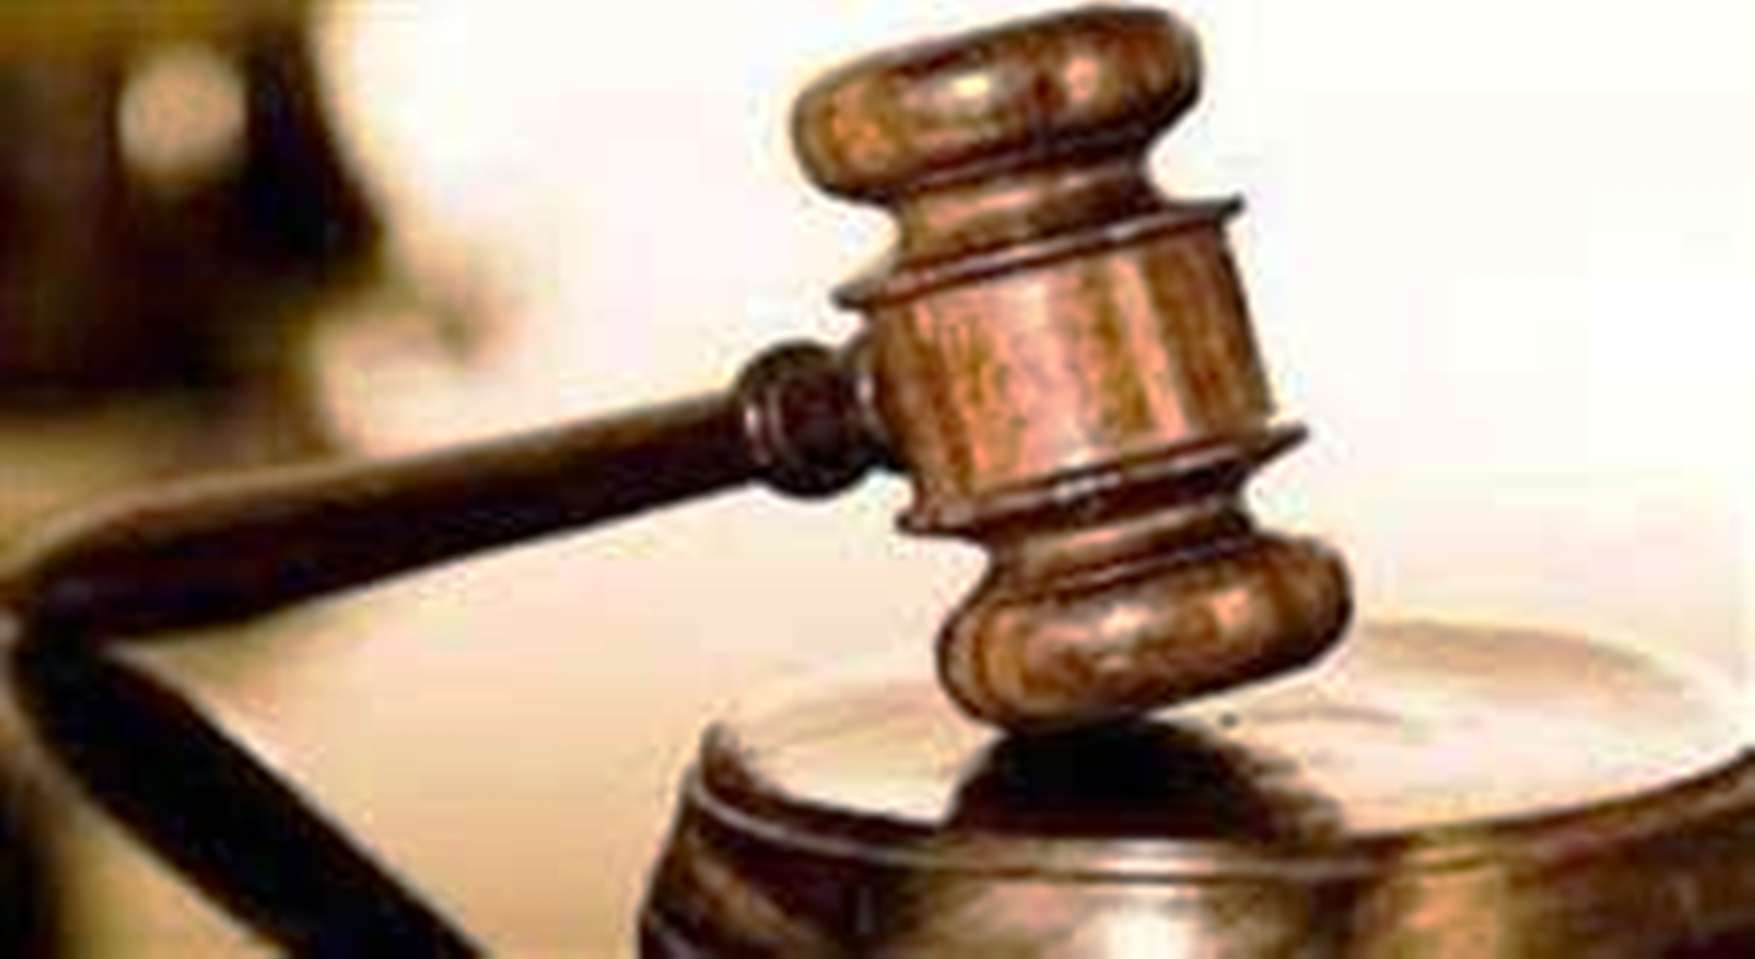 court ordered ten year imprisonment to accused mother